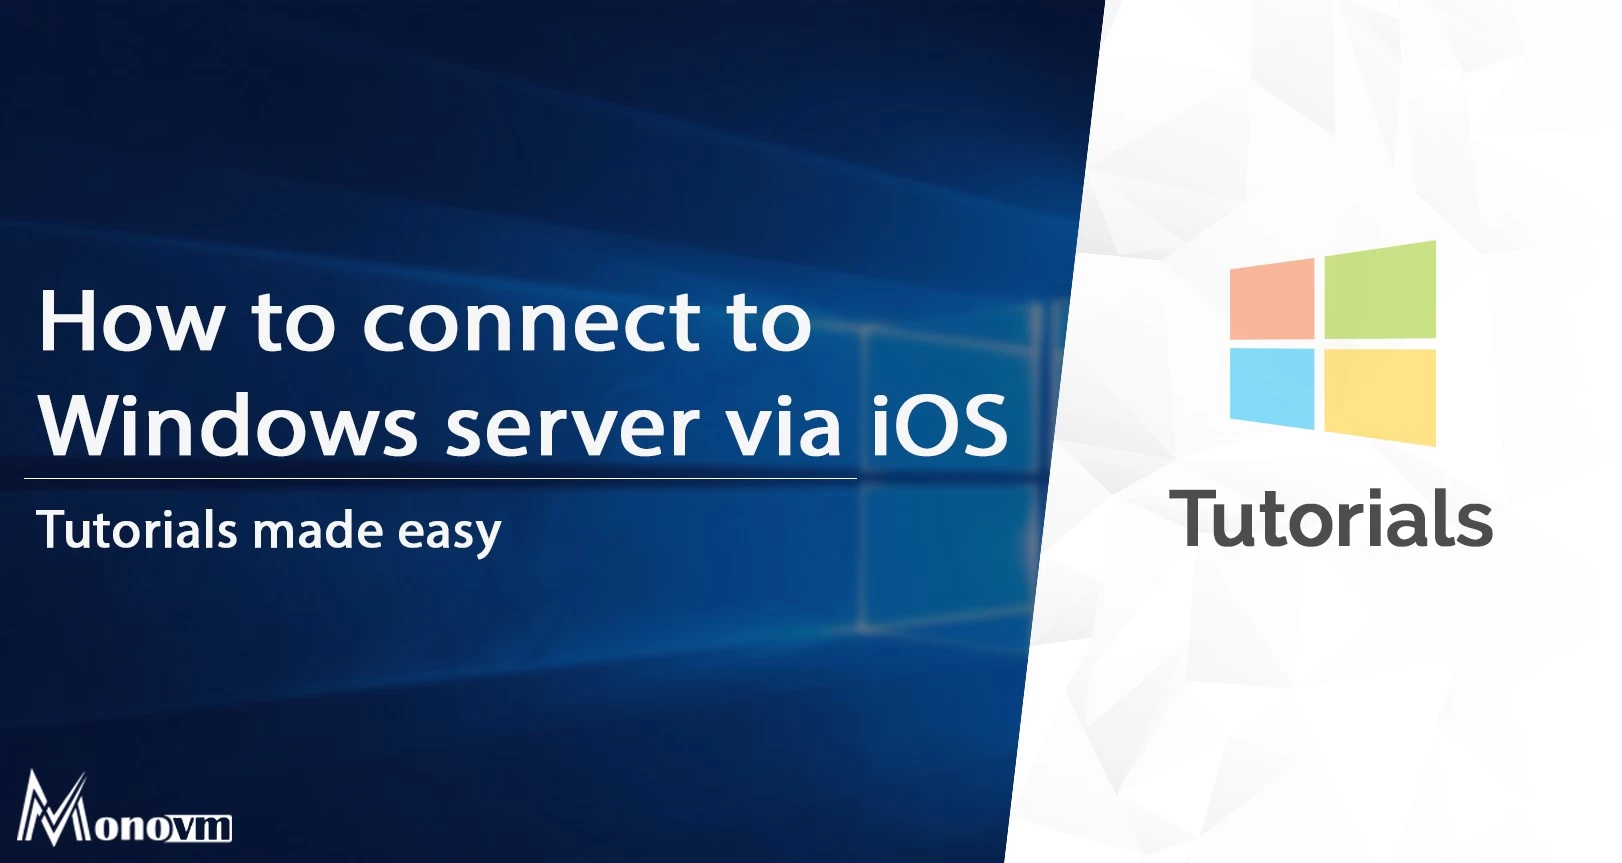 How to connect to Windows server via iOS and iPhone